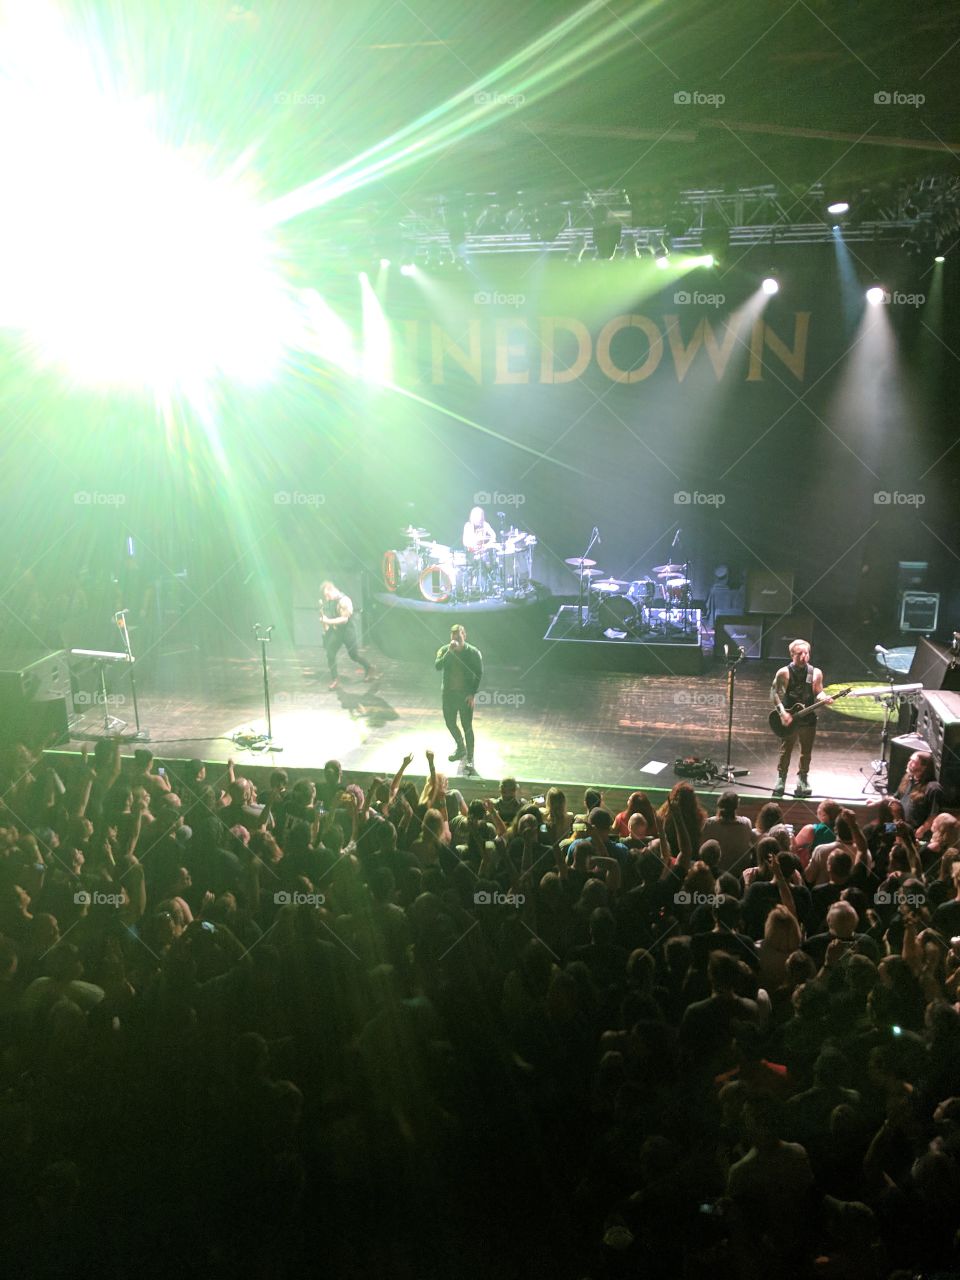 Shinedown concert at the House of Blues, Orlando, FL 12/29/2018